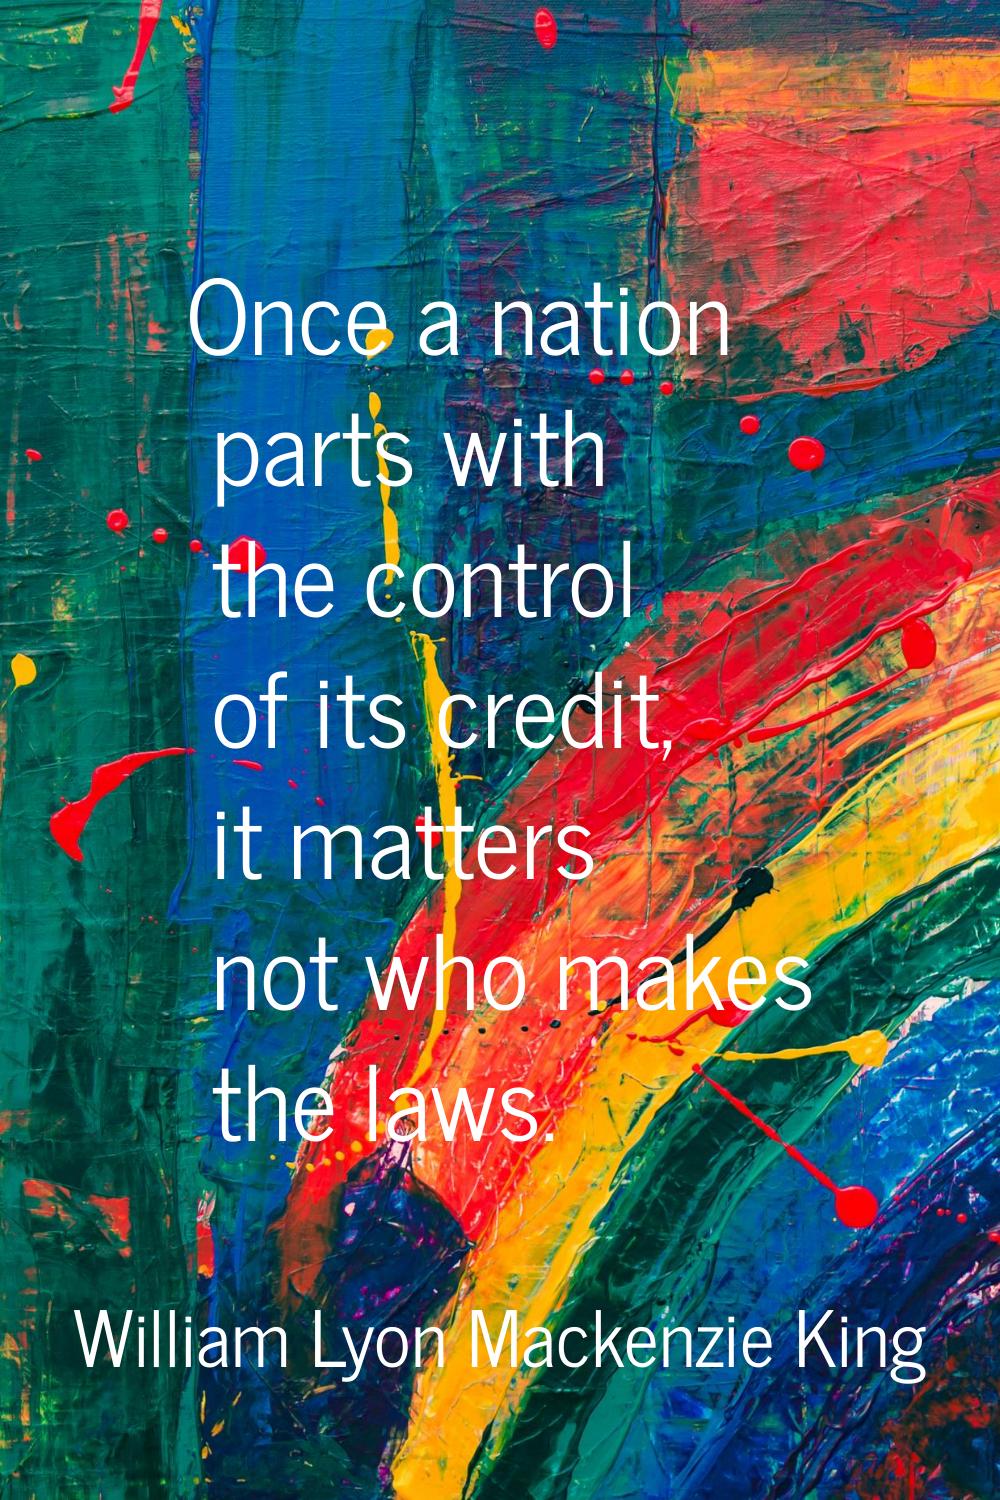 Once a nation parts with the control of its credit, it matters not who makes the laws.